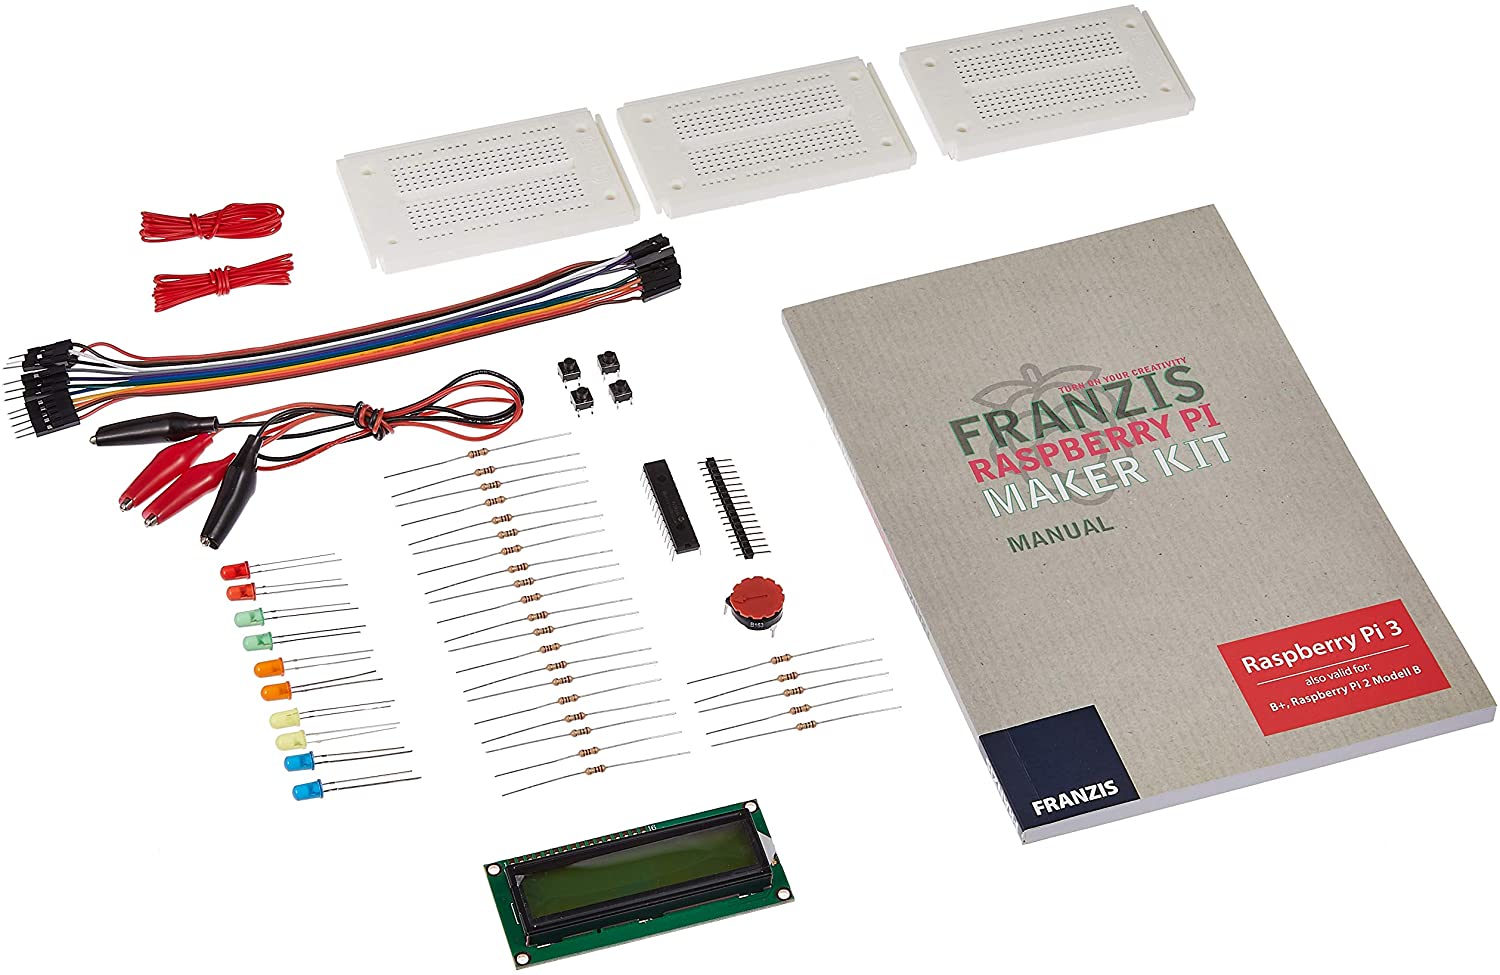 Franzis Raspberry Pi Maker Kit: 20 Amazing Projects, Build Gamepad For Game